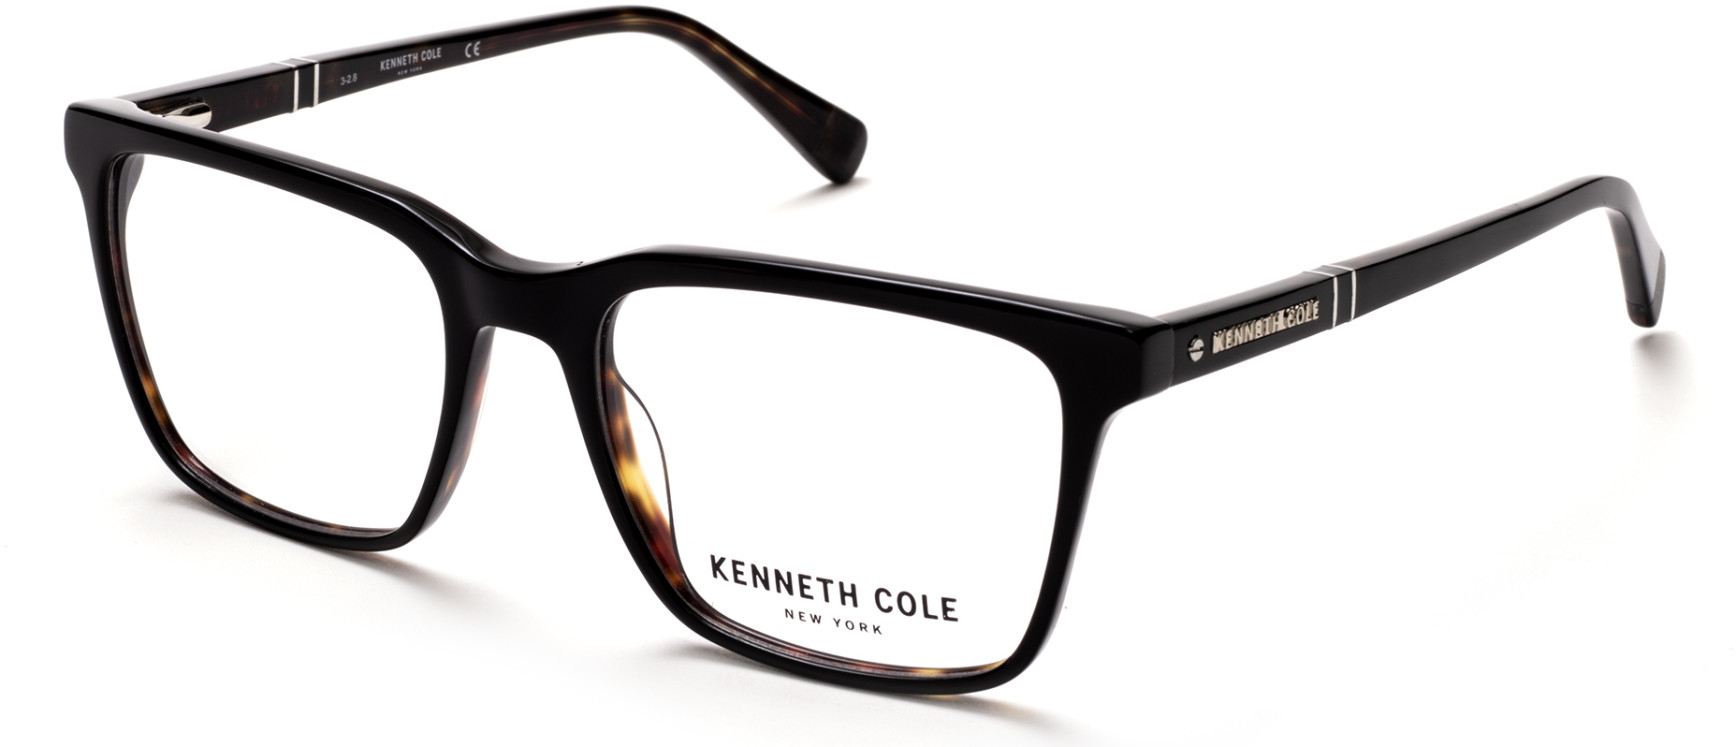 KENNETH COLE NY 0290